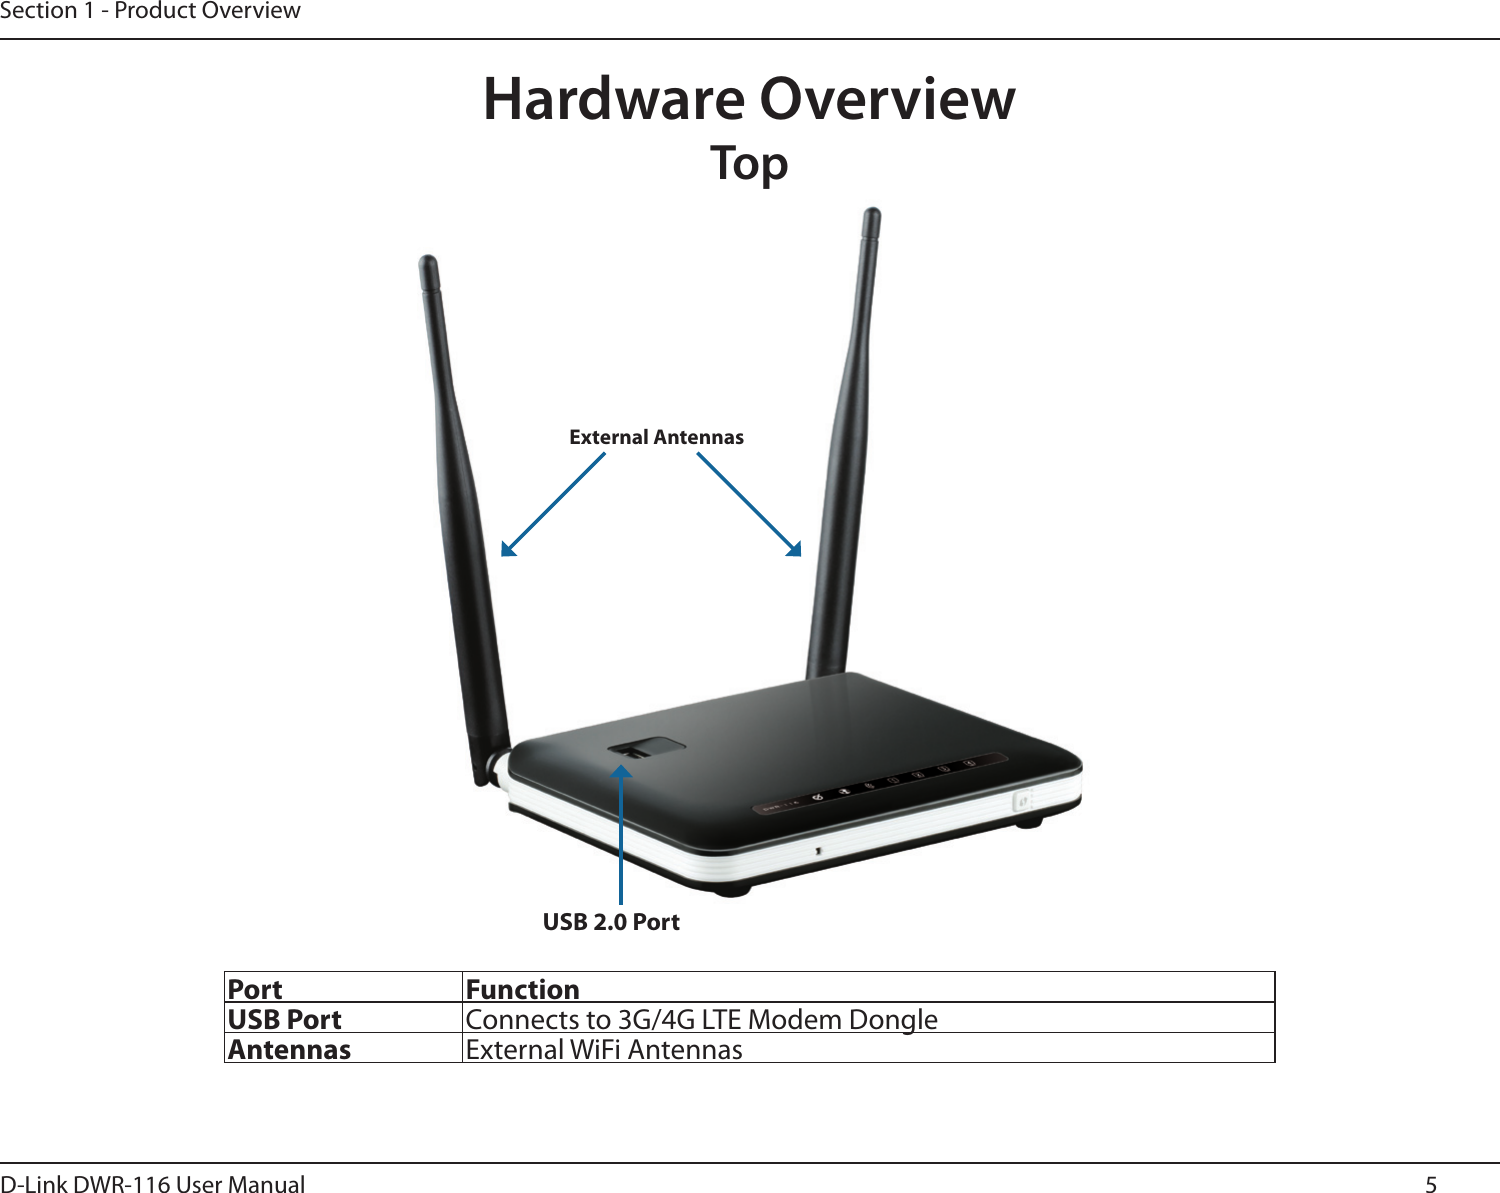 5D-Link DWR-116 User ManualSection 1 - Product OverviewHardware OverviewTopPort FunctionUSB Port Connects to 3G/4G LTE Modem DongleAntennas External WiFi AntennasUSB 2.0 PortExternal Antennas